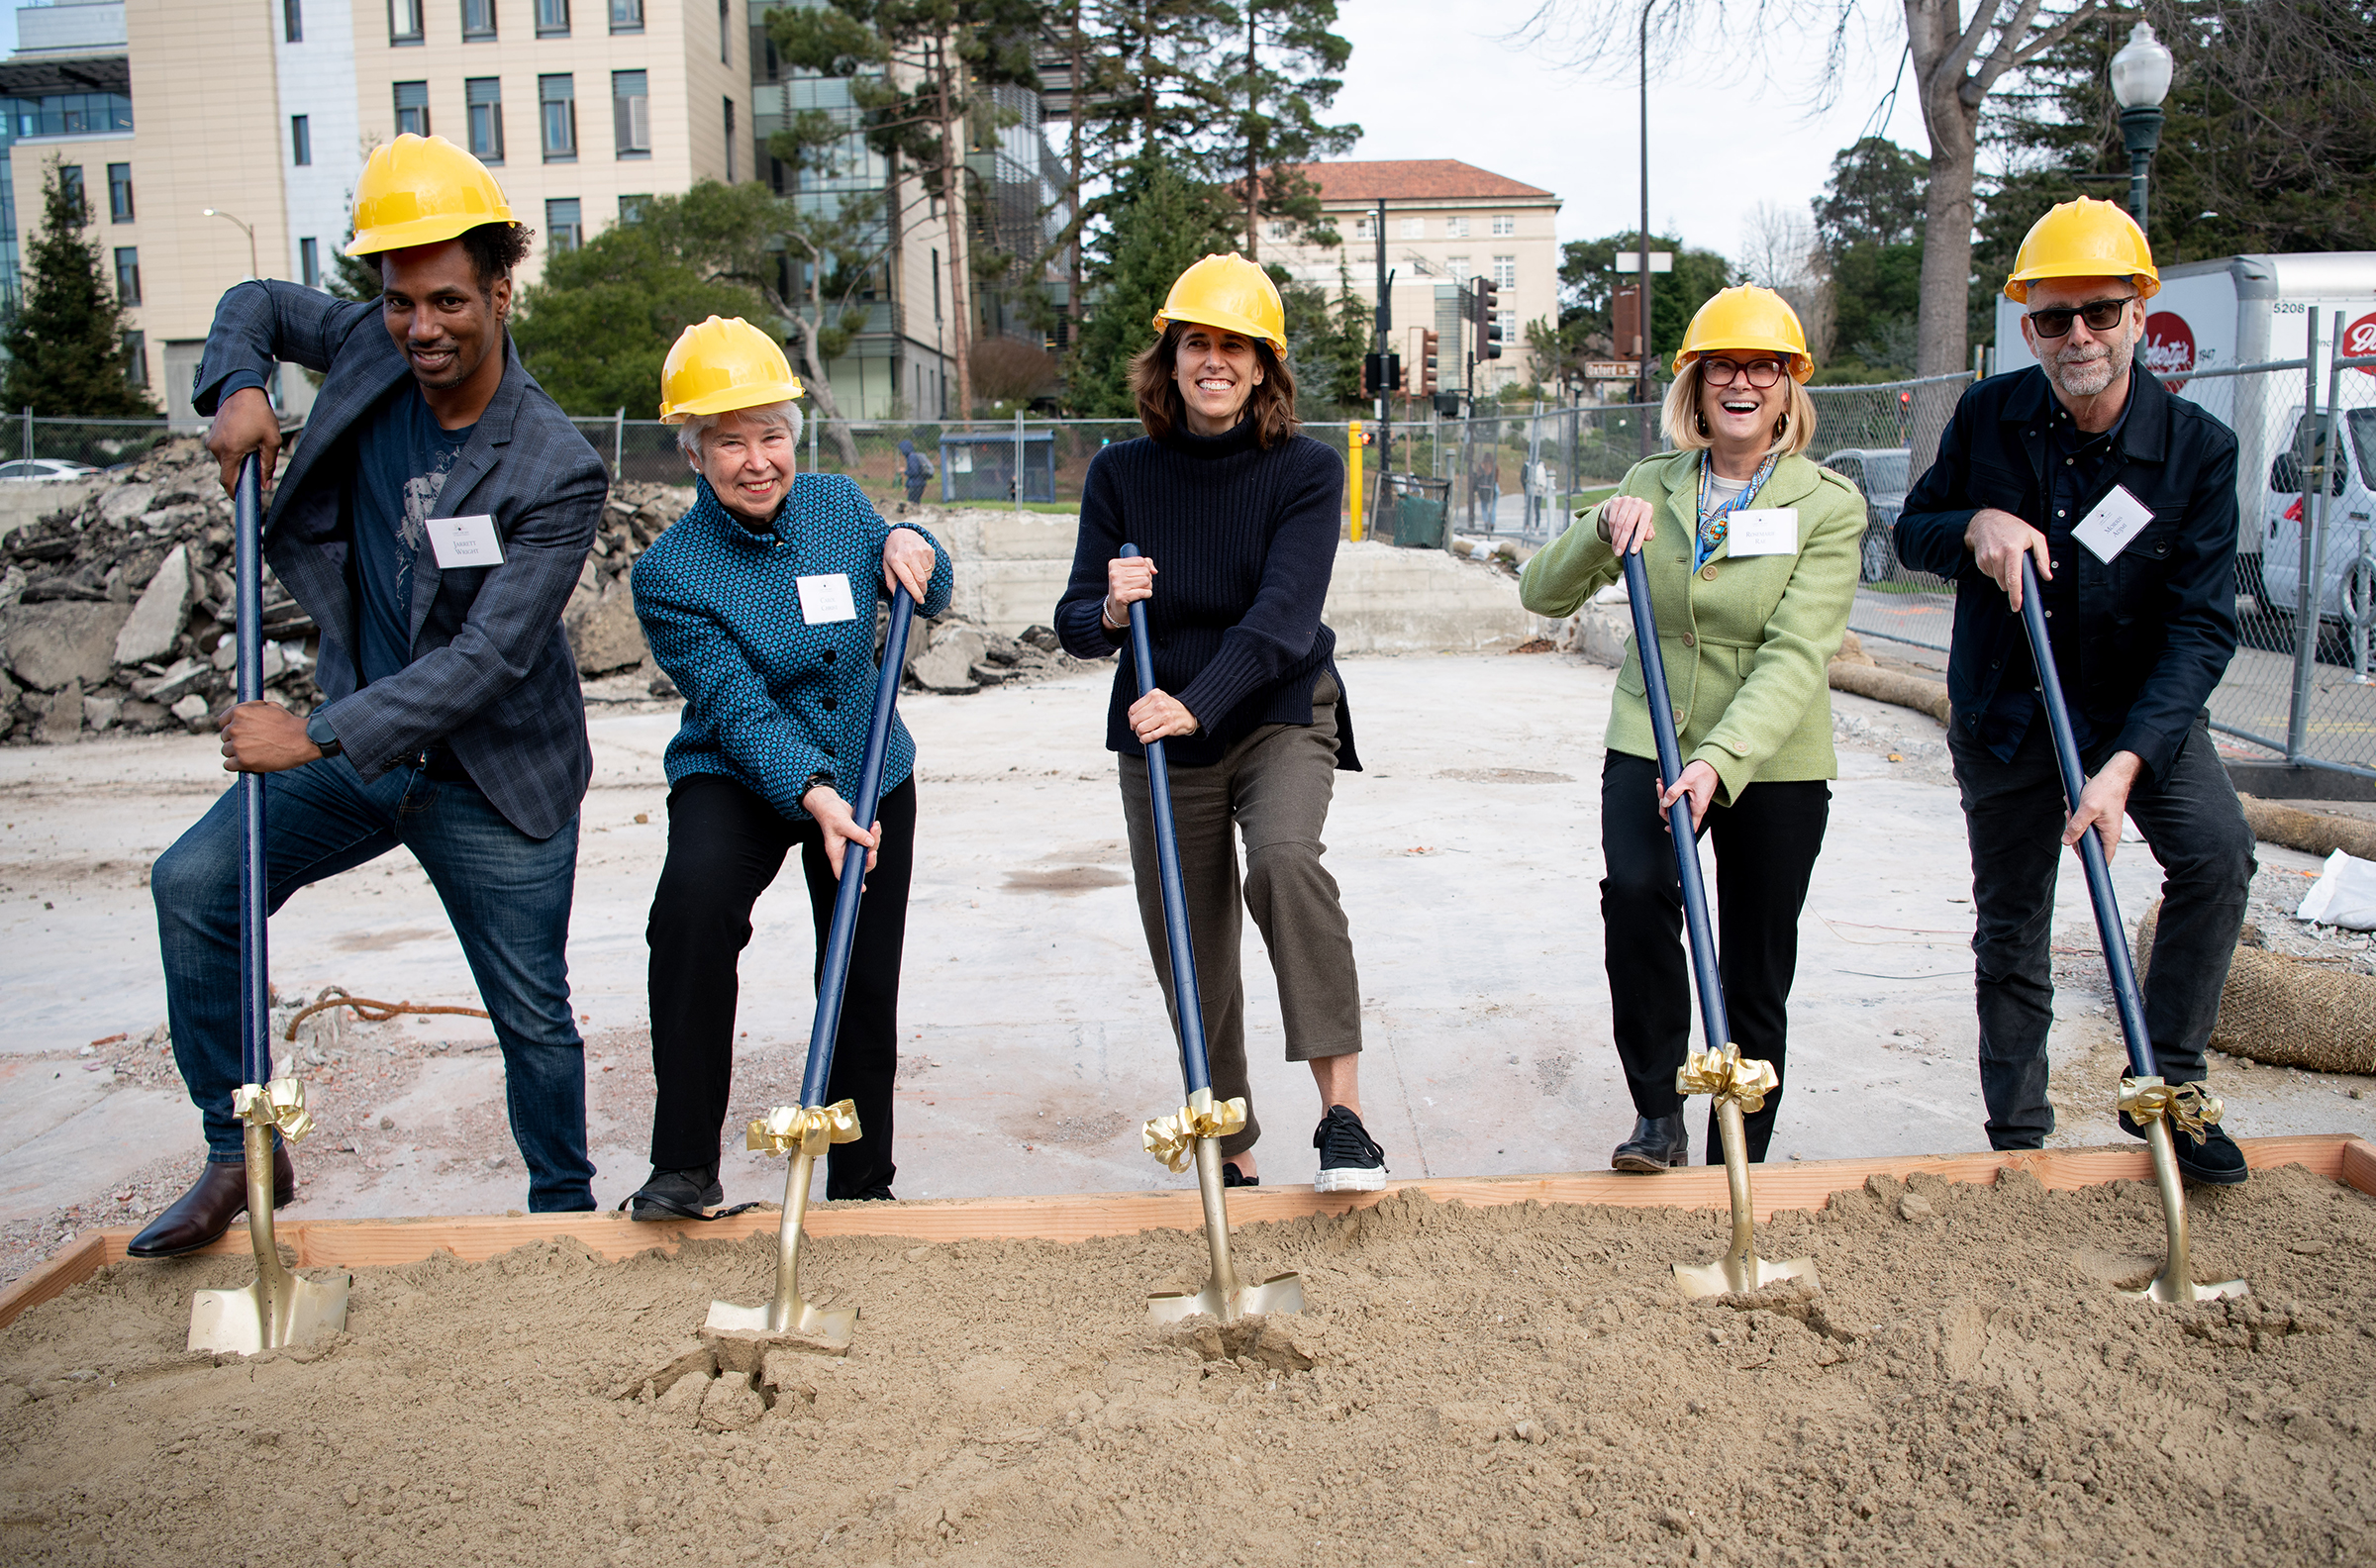 Photo of five people wearing bright yellow construction hats holding shovels, prepared to dig into dirt.